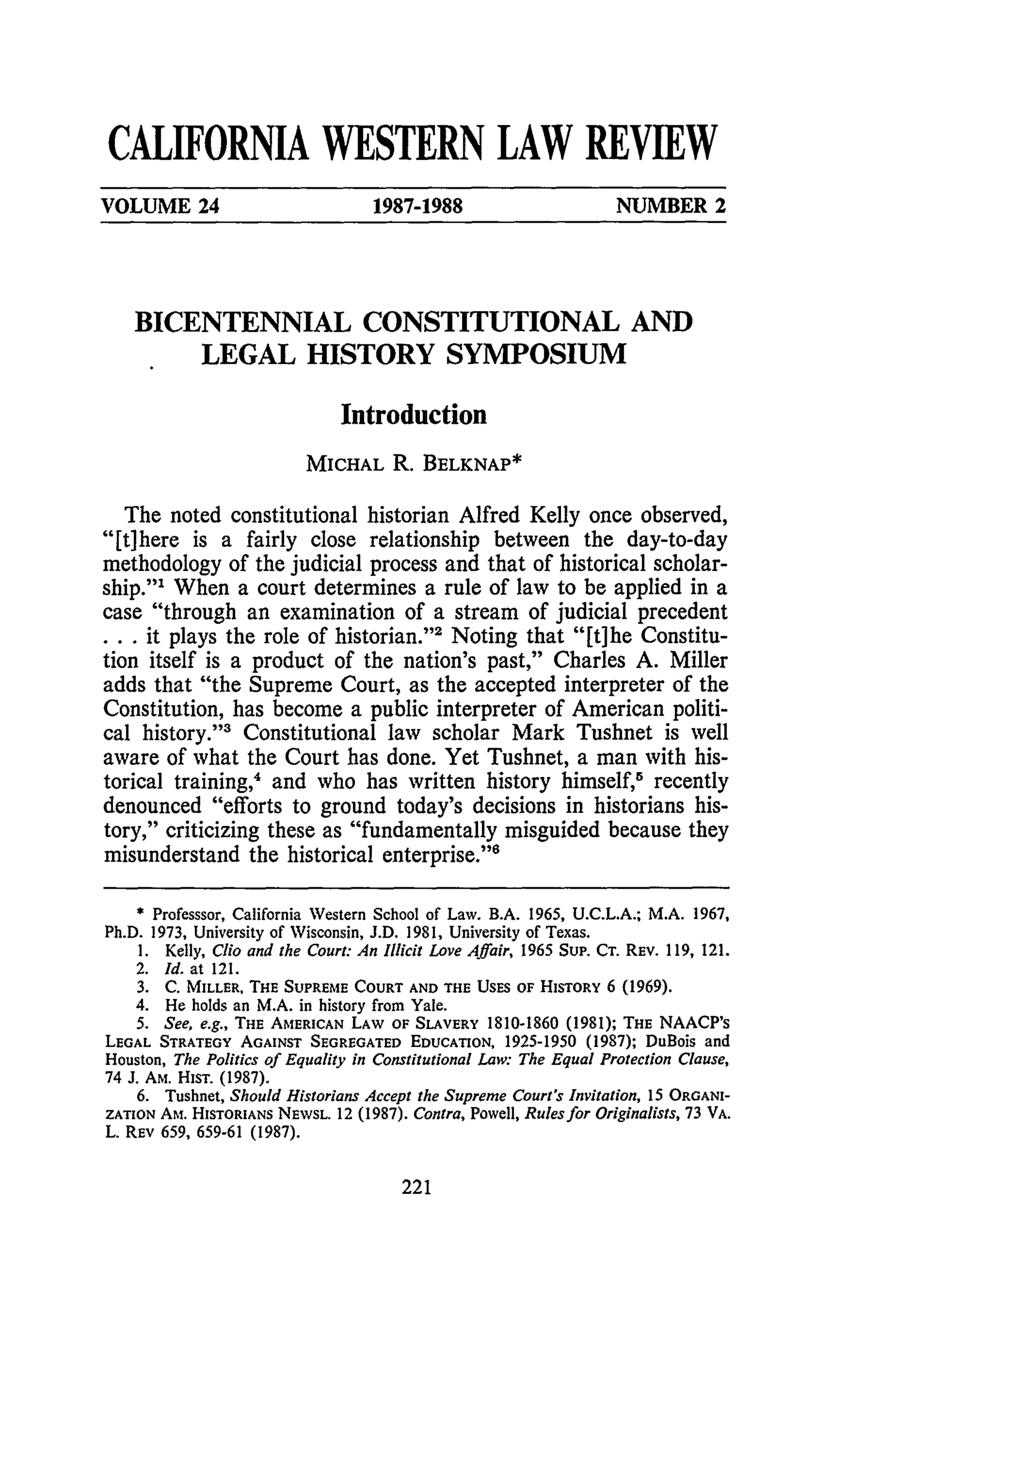 Belknap: Bicentennial Constitutional and Legal History Symposium CALIFORNIA WESTERN LAW REVIEW VOLUME 24 1987-1988 NUMBER 2 BICENTENNIAL CONSTITUTIONAL AND LEGAL HISTORY SYMPOSIUM Introduction MICHAL